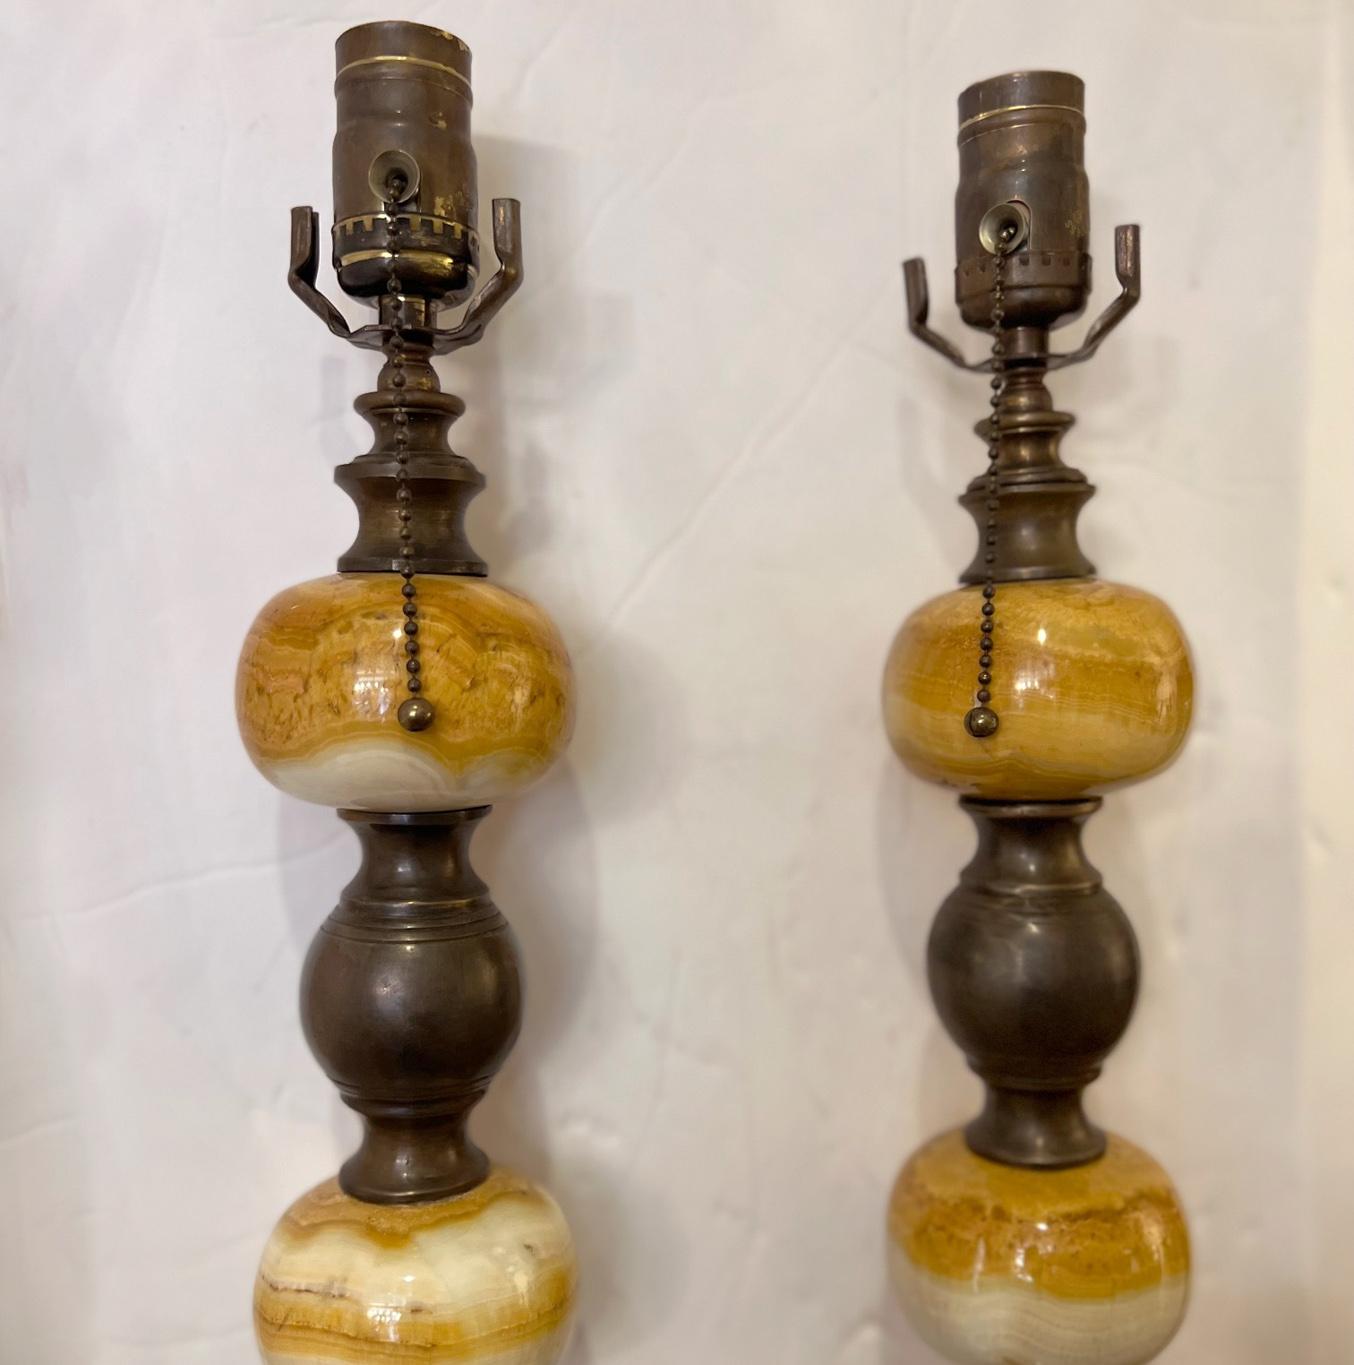 Pair of tall circa 1940s' Italian onyx and bronze table lamps with original patina

Measurements:
Height: 32